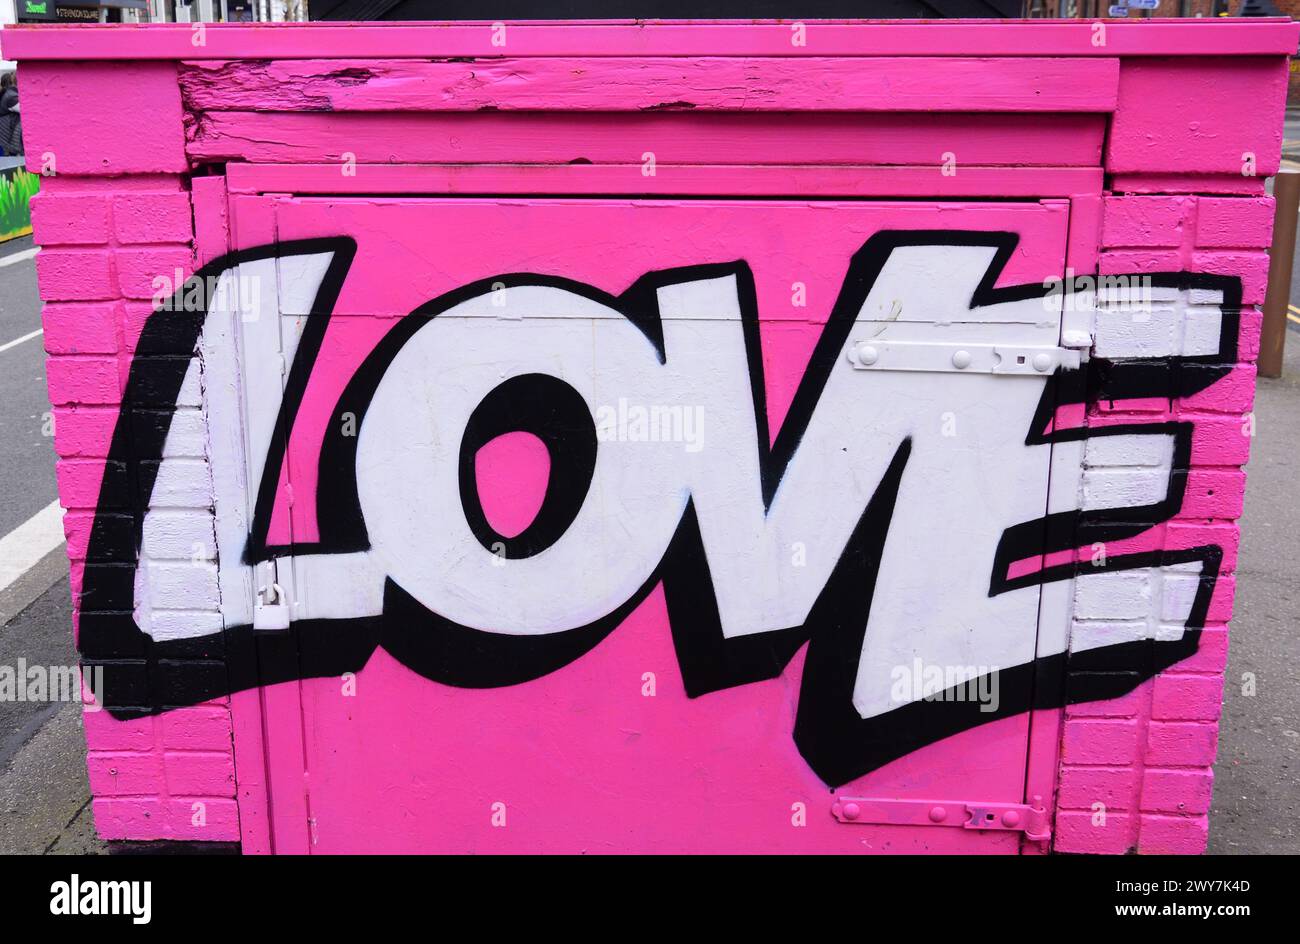 Painted love message on street furniture in Stephenson Square, central Manchester, UK Stock Photo